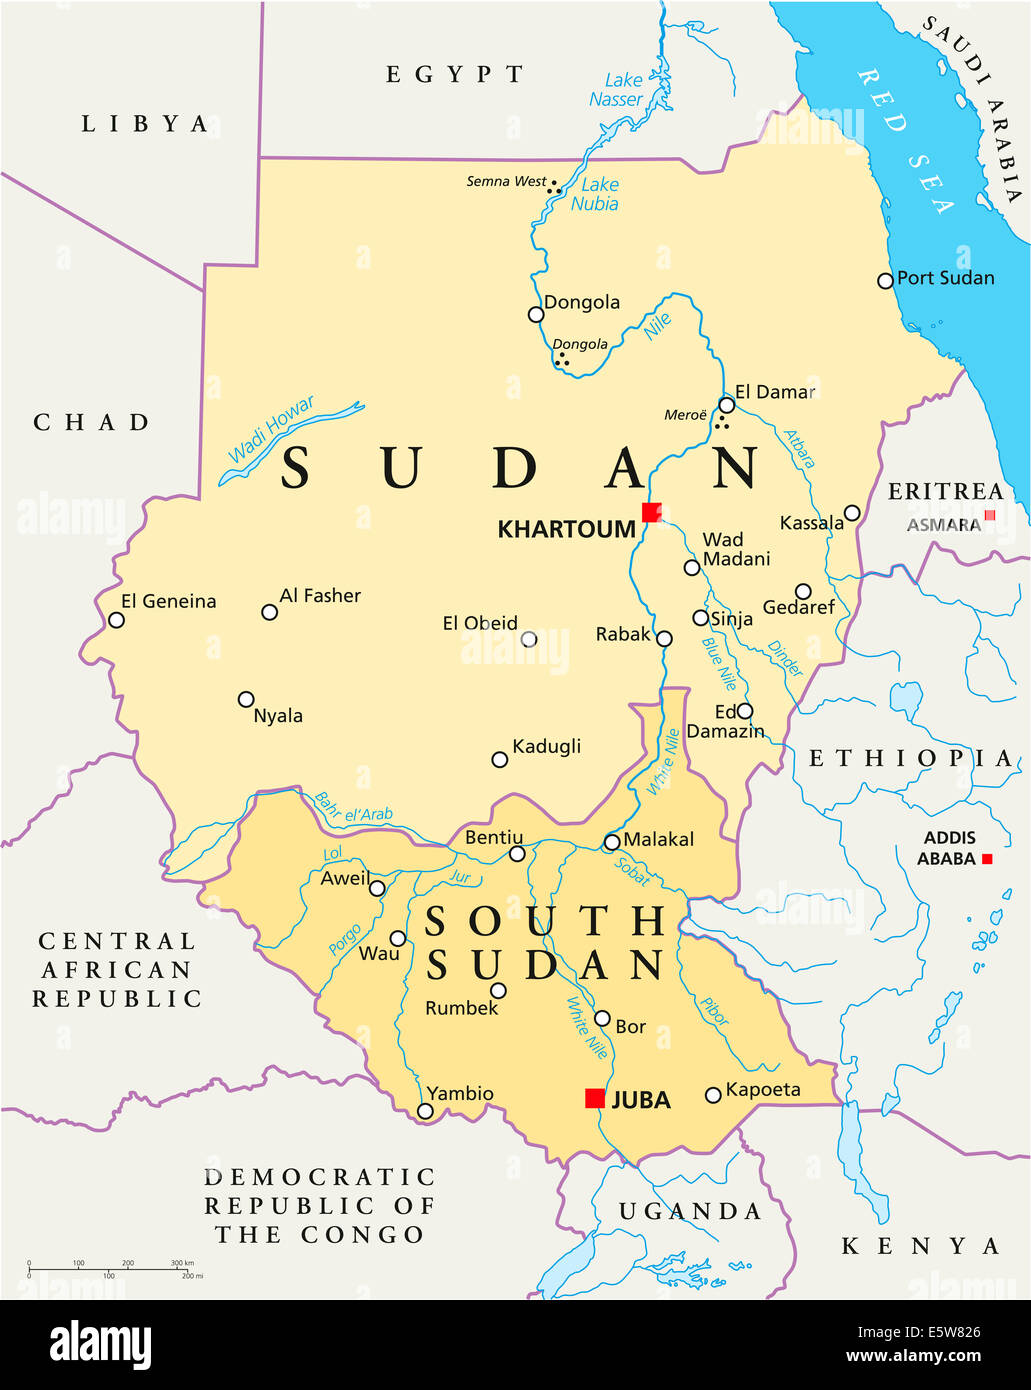 Sudan and South Sudan Political Map with capitals Khartoum and Juba, national borders, important cities, rivers and lakes. Stock Photo